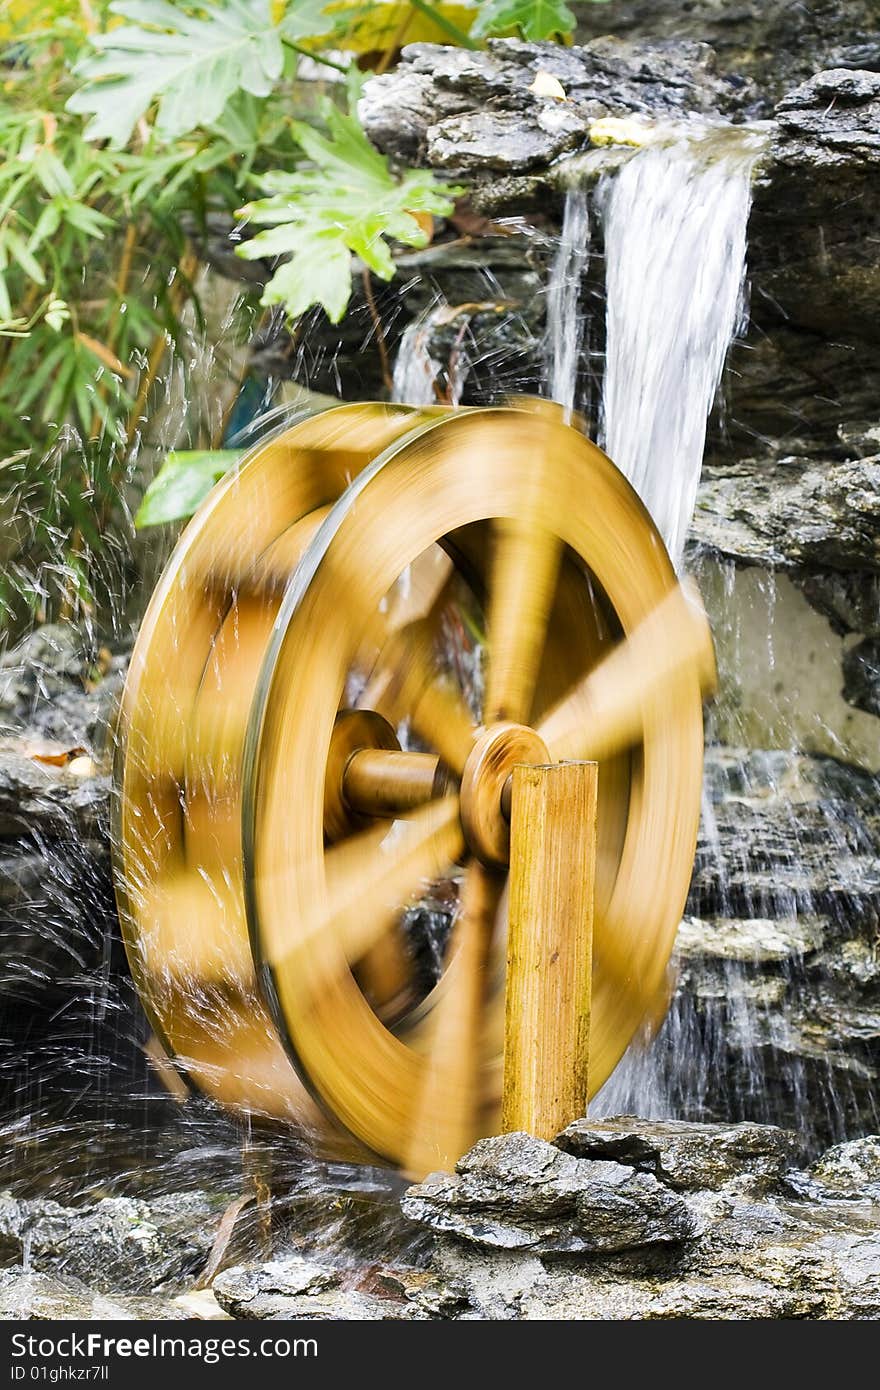 A turning water wheel in the park